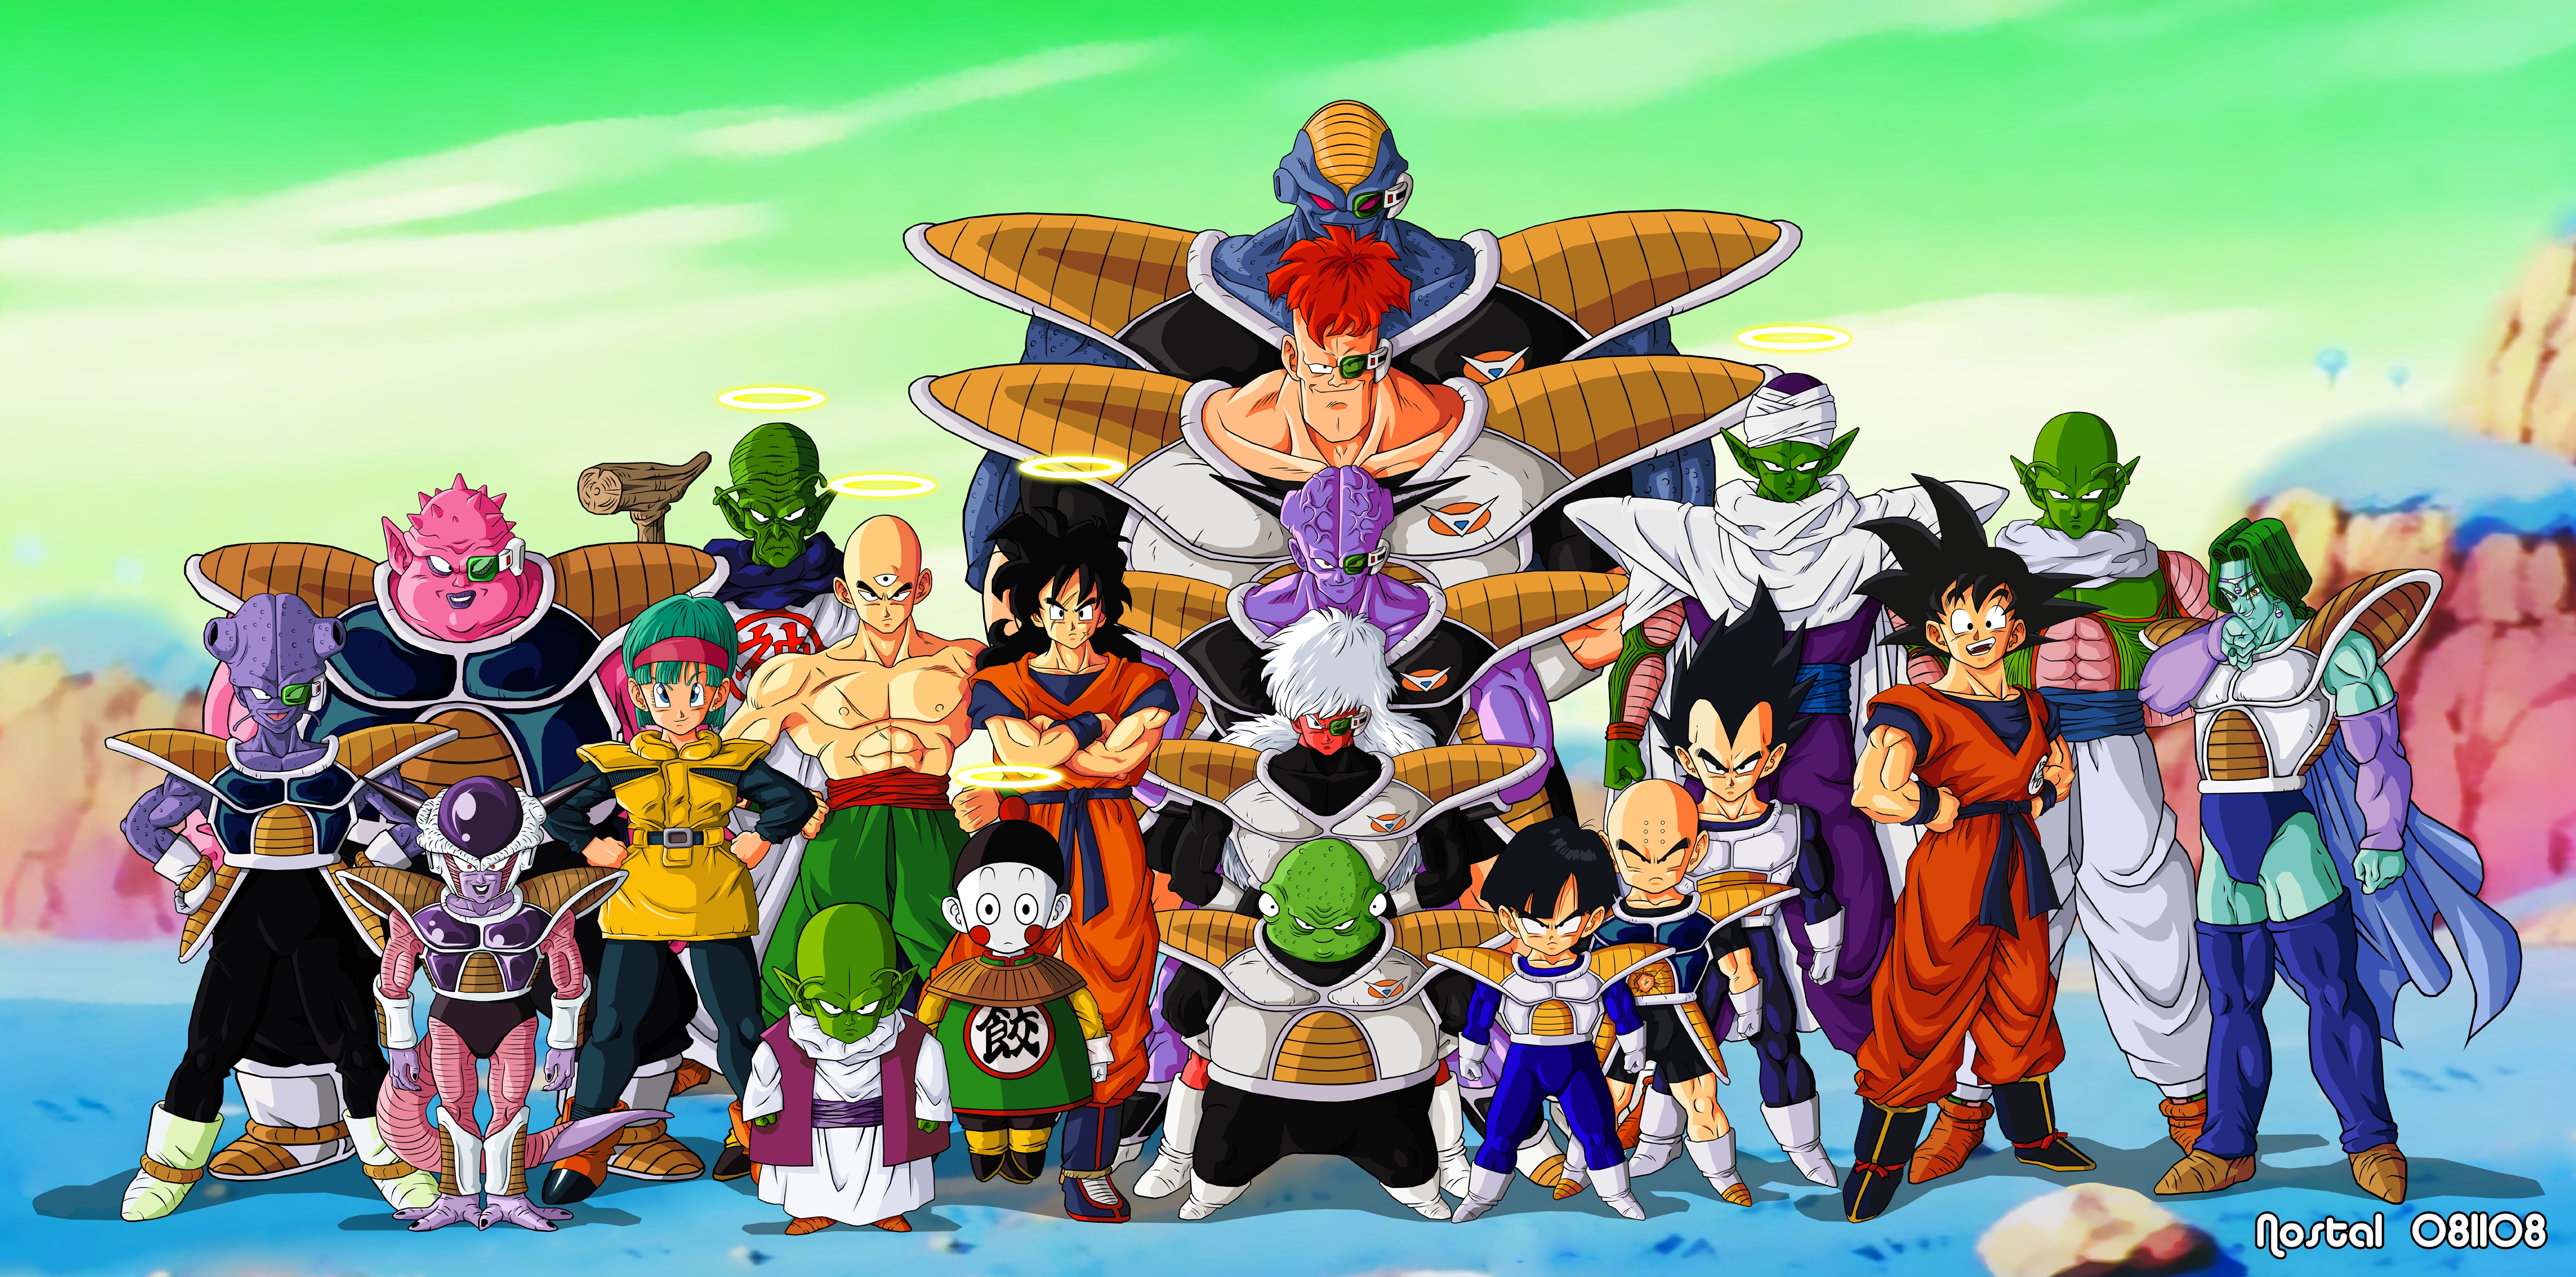 210+ 4K Anime Dragon Ball Z Wallpapers | Background Images